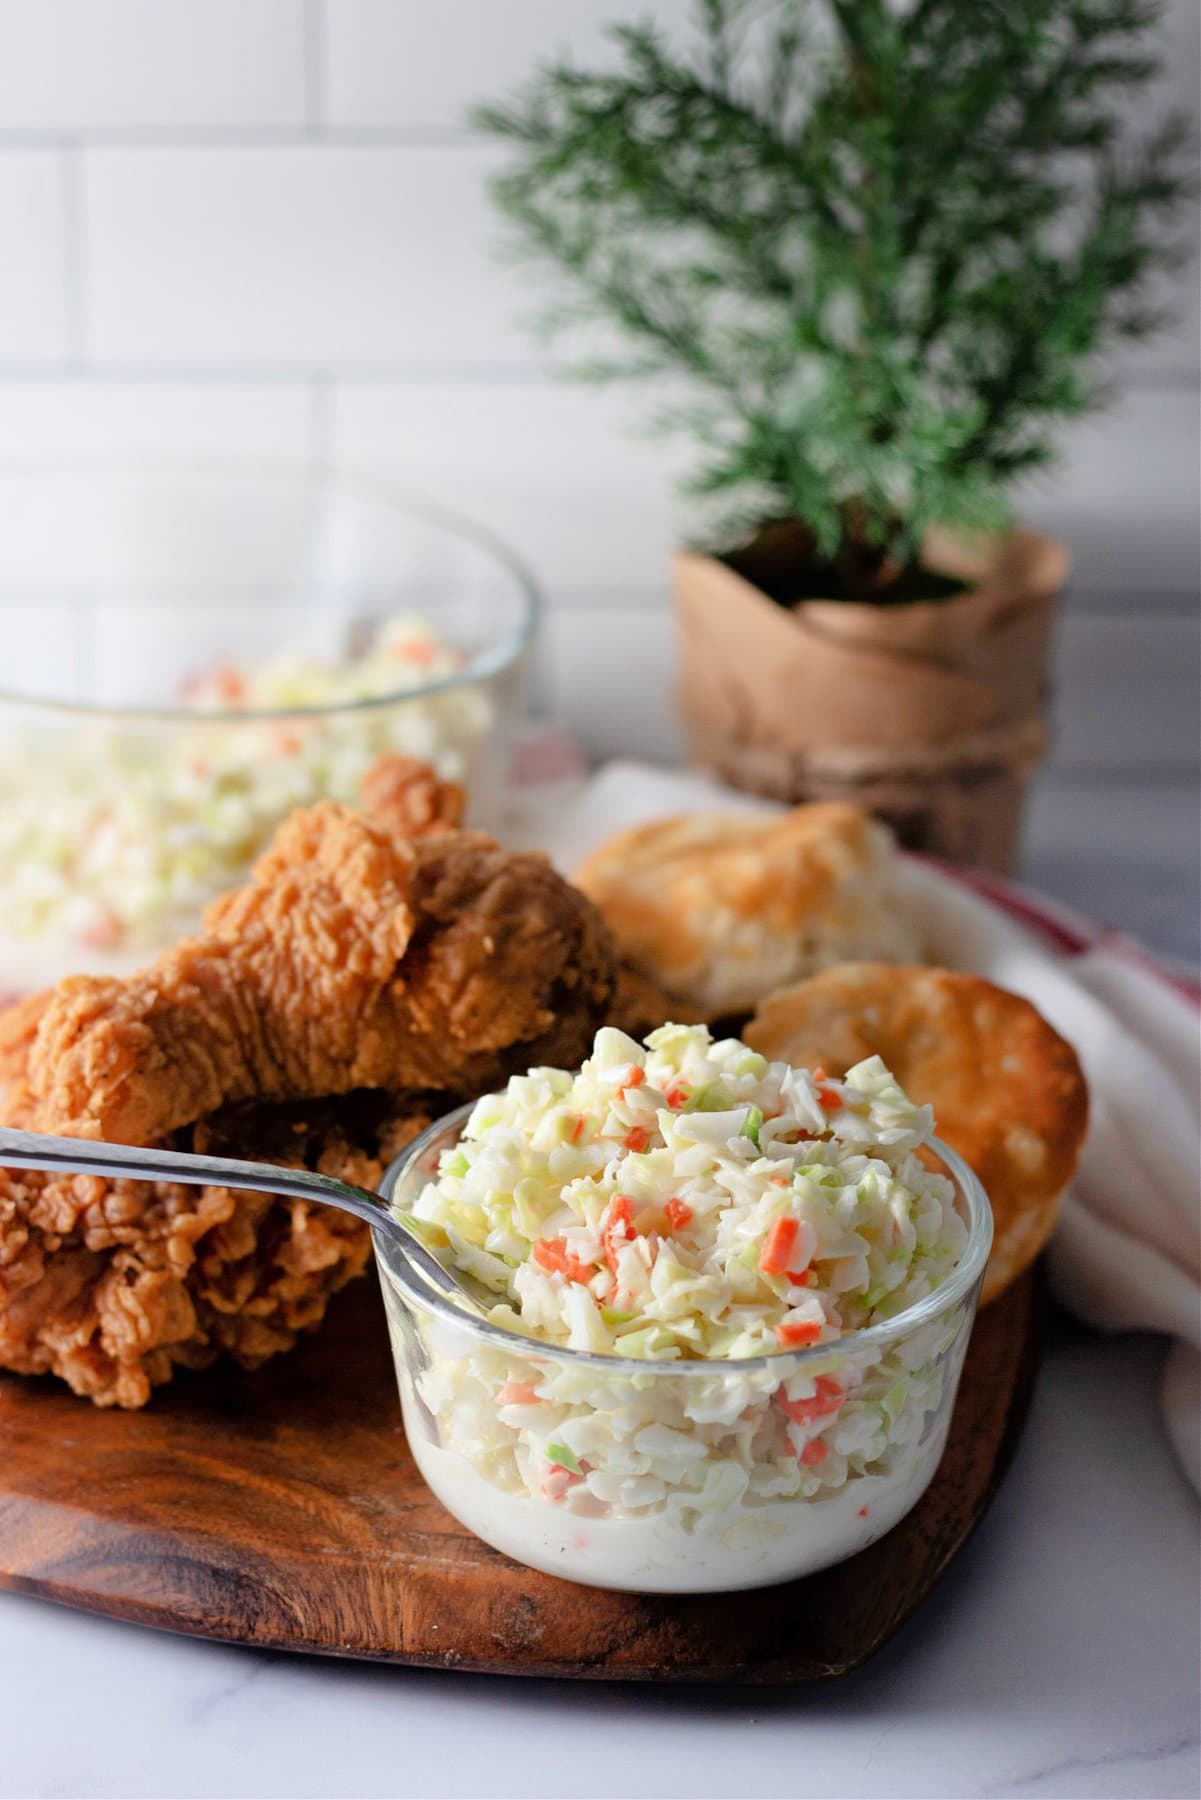 A spoon mixing a small dish of KFC coleslaw in front of fried chicken and biscuits